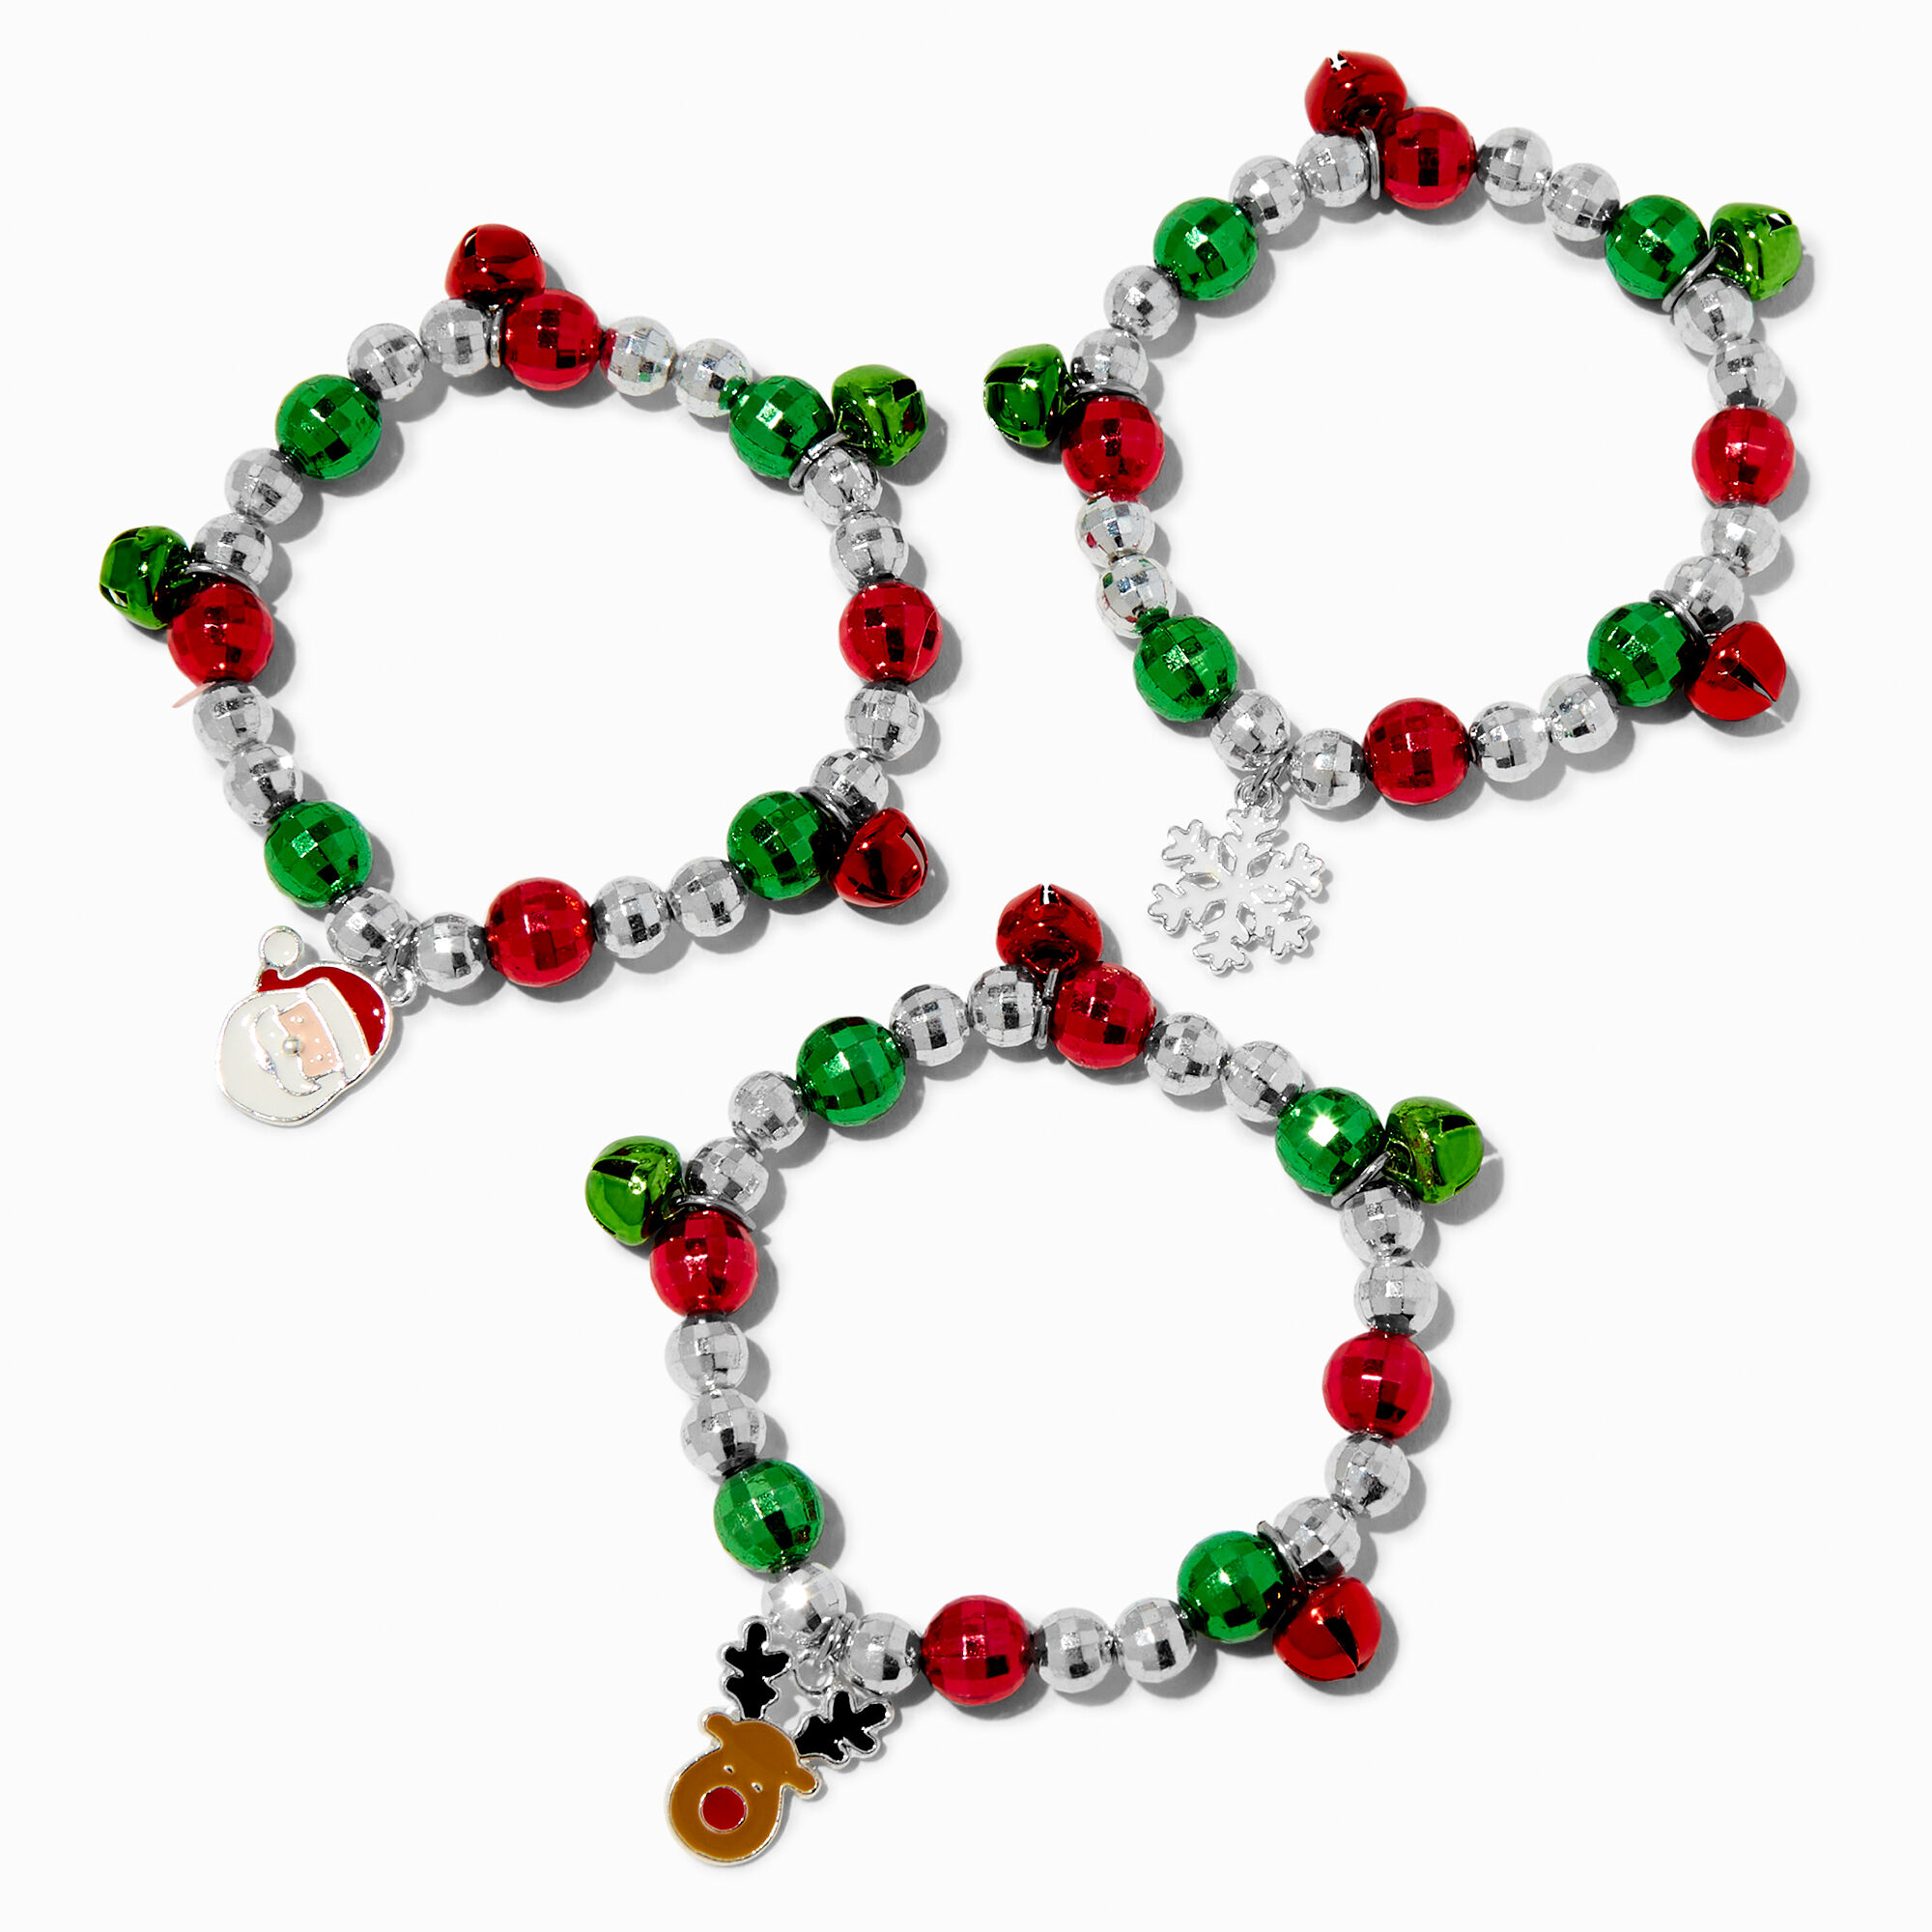 View Claires Christmas Jingle Bells Stretch Charm Bracelets 3 Pack information